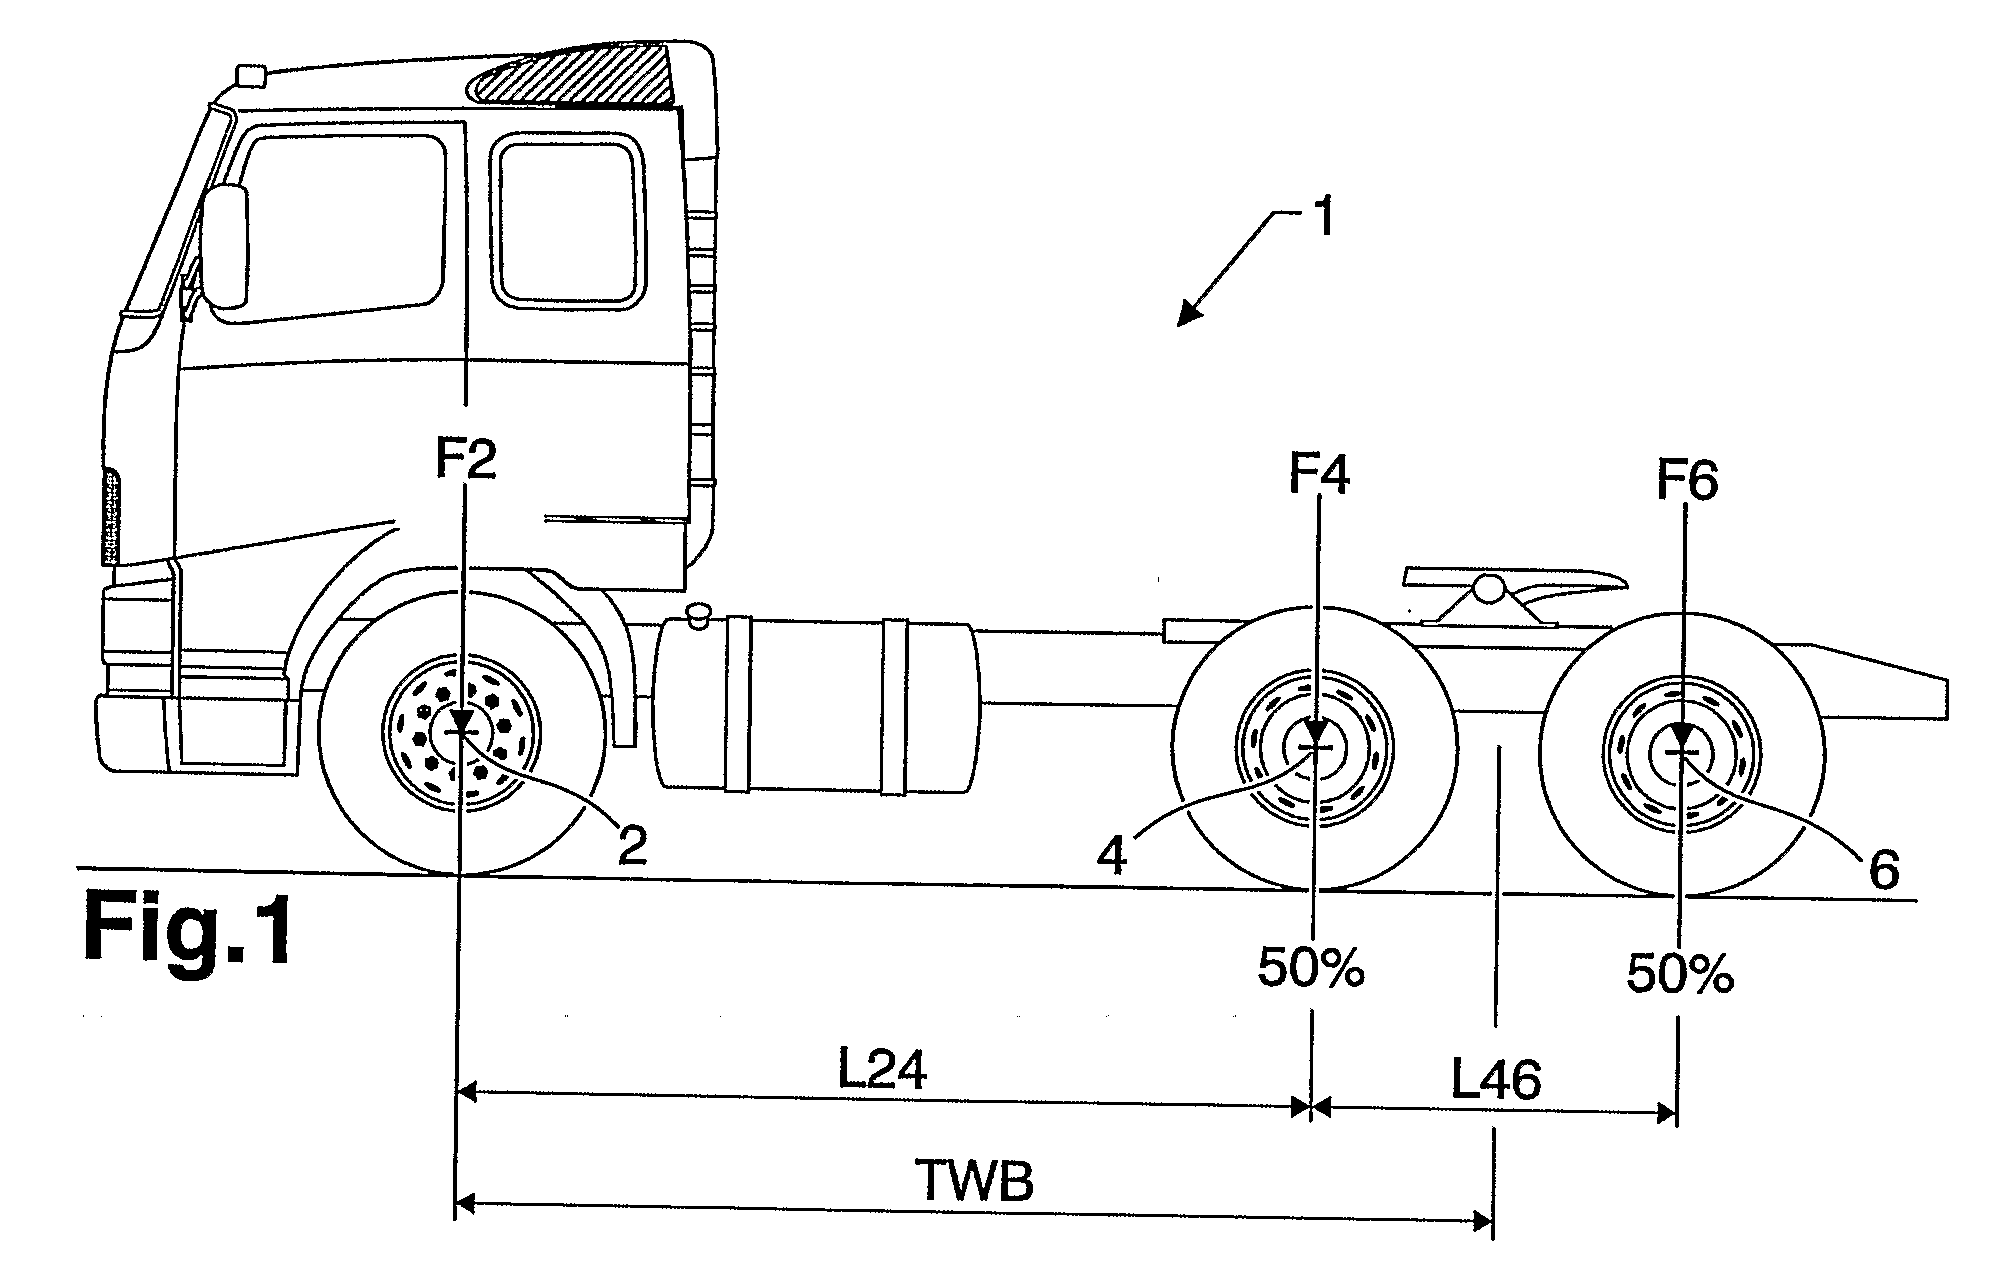 System and Method for Controlling the Axle Load Split Ratio on a Vehicle With Two Front Axles